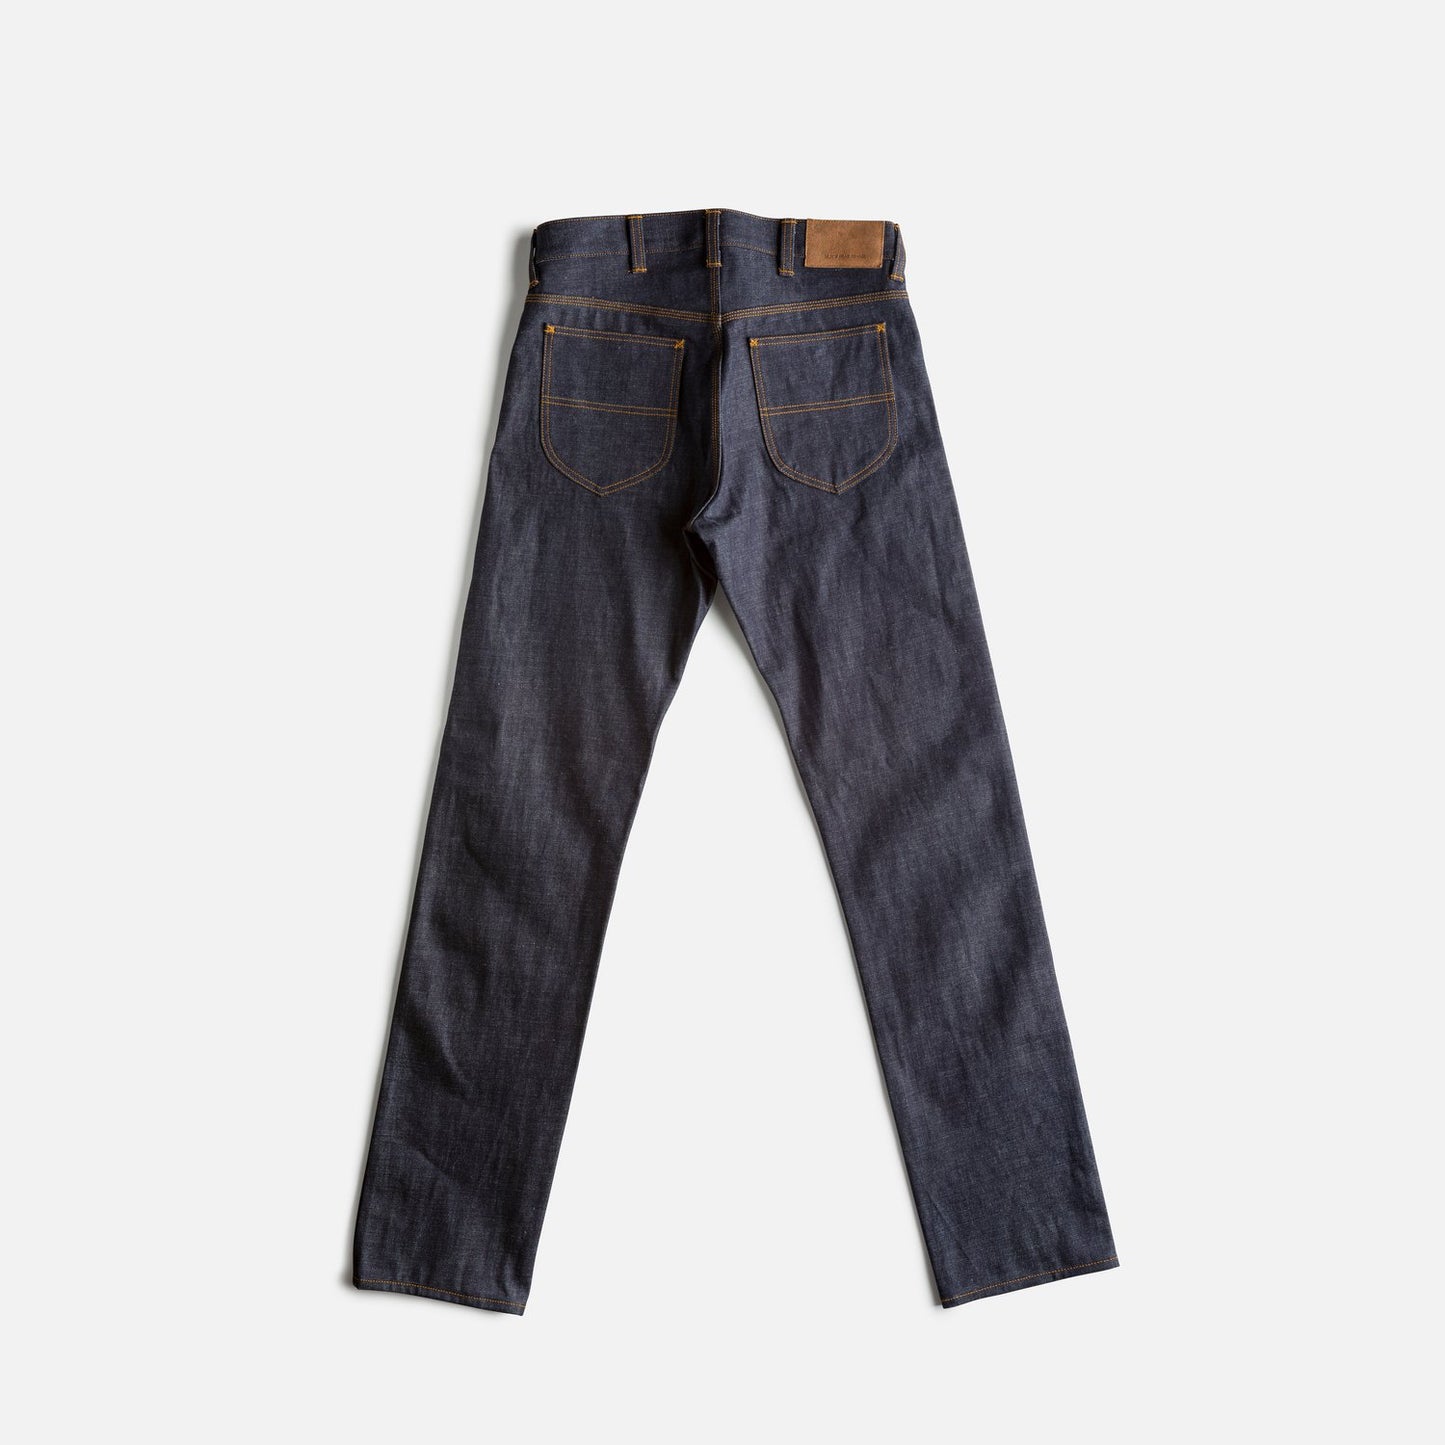 the Black Bear Brand ONE Jeans